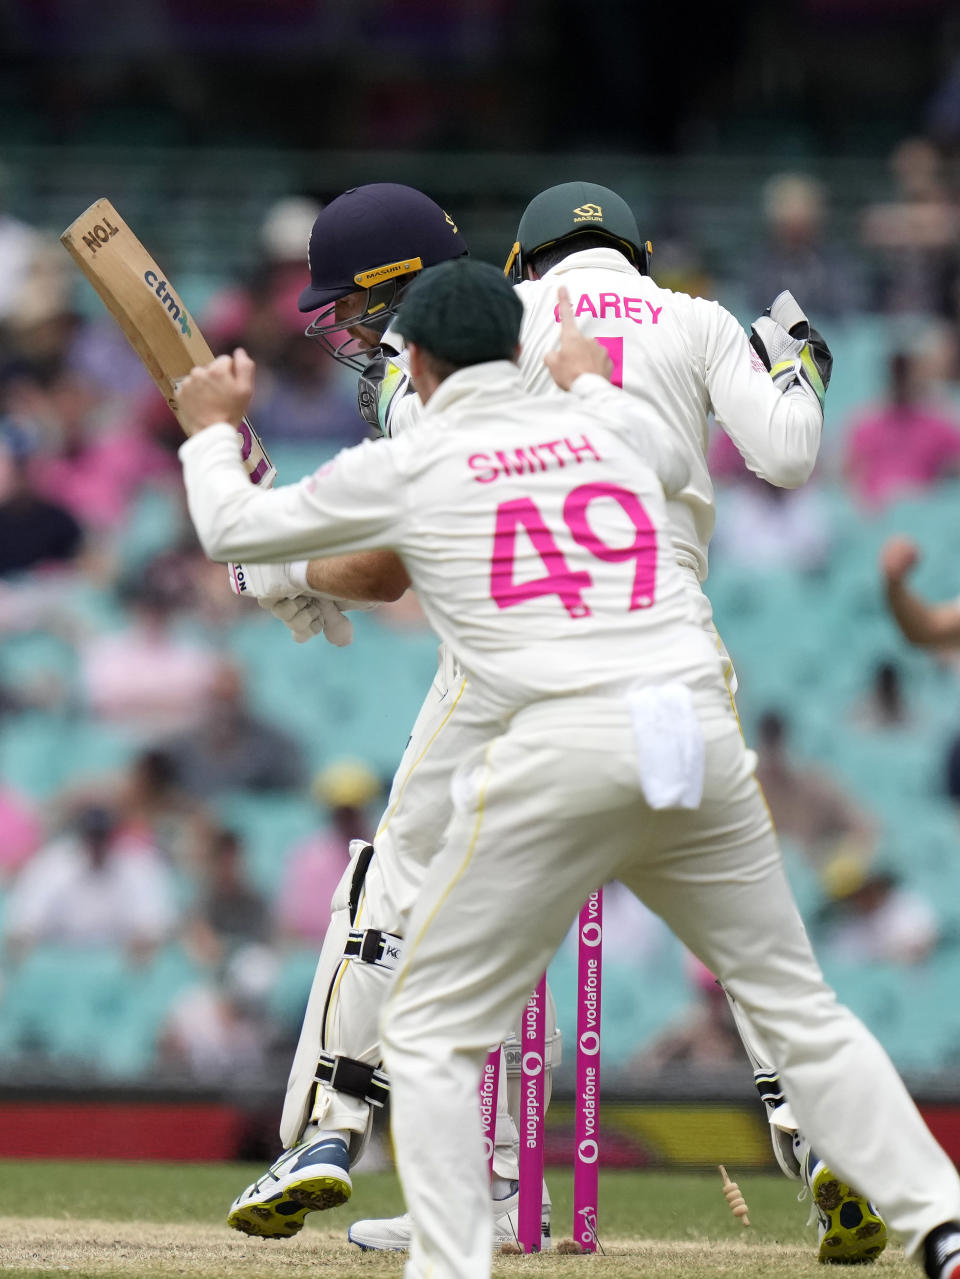 England's Dawid Malan, back, is bowled by Australia's Nathan Lyon during the fifth day of their Ashes cricket test match in Sydney, Sunday, Jan. 9, 2022. (AP Photo/Rick Rycroft)